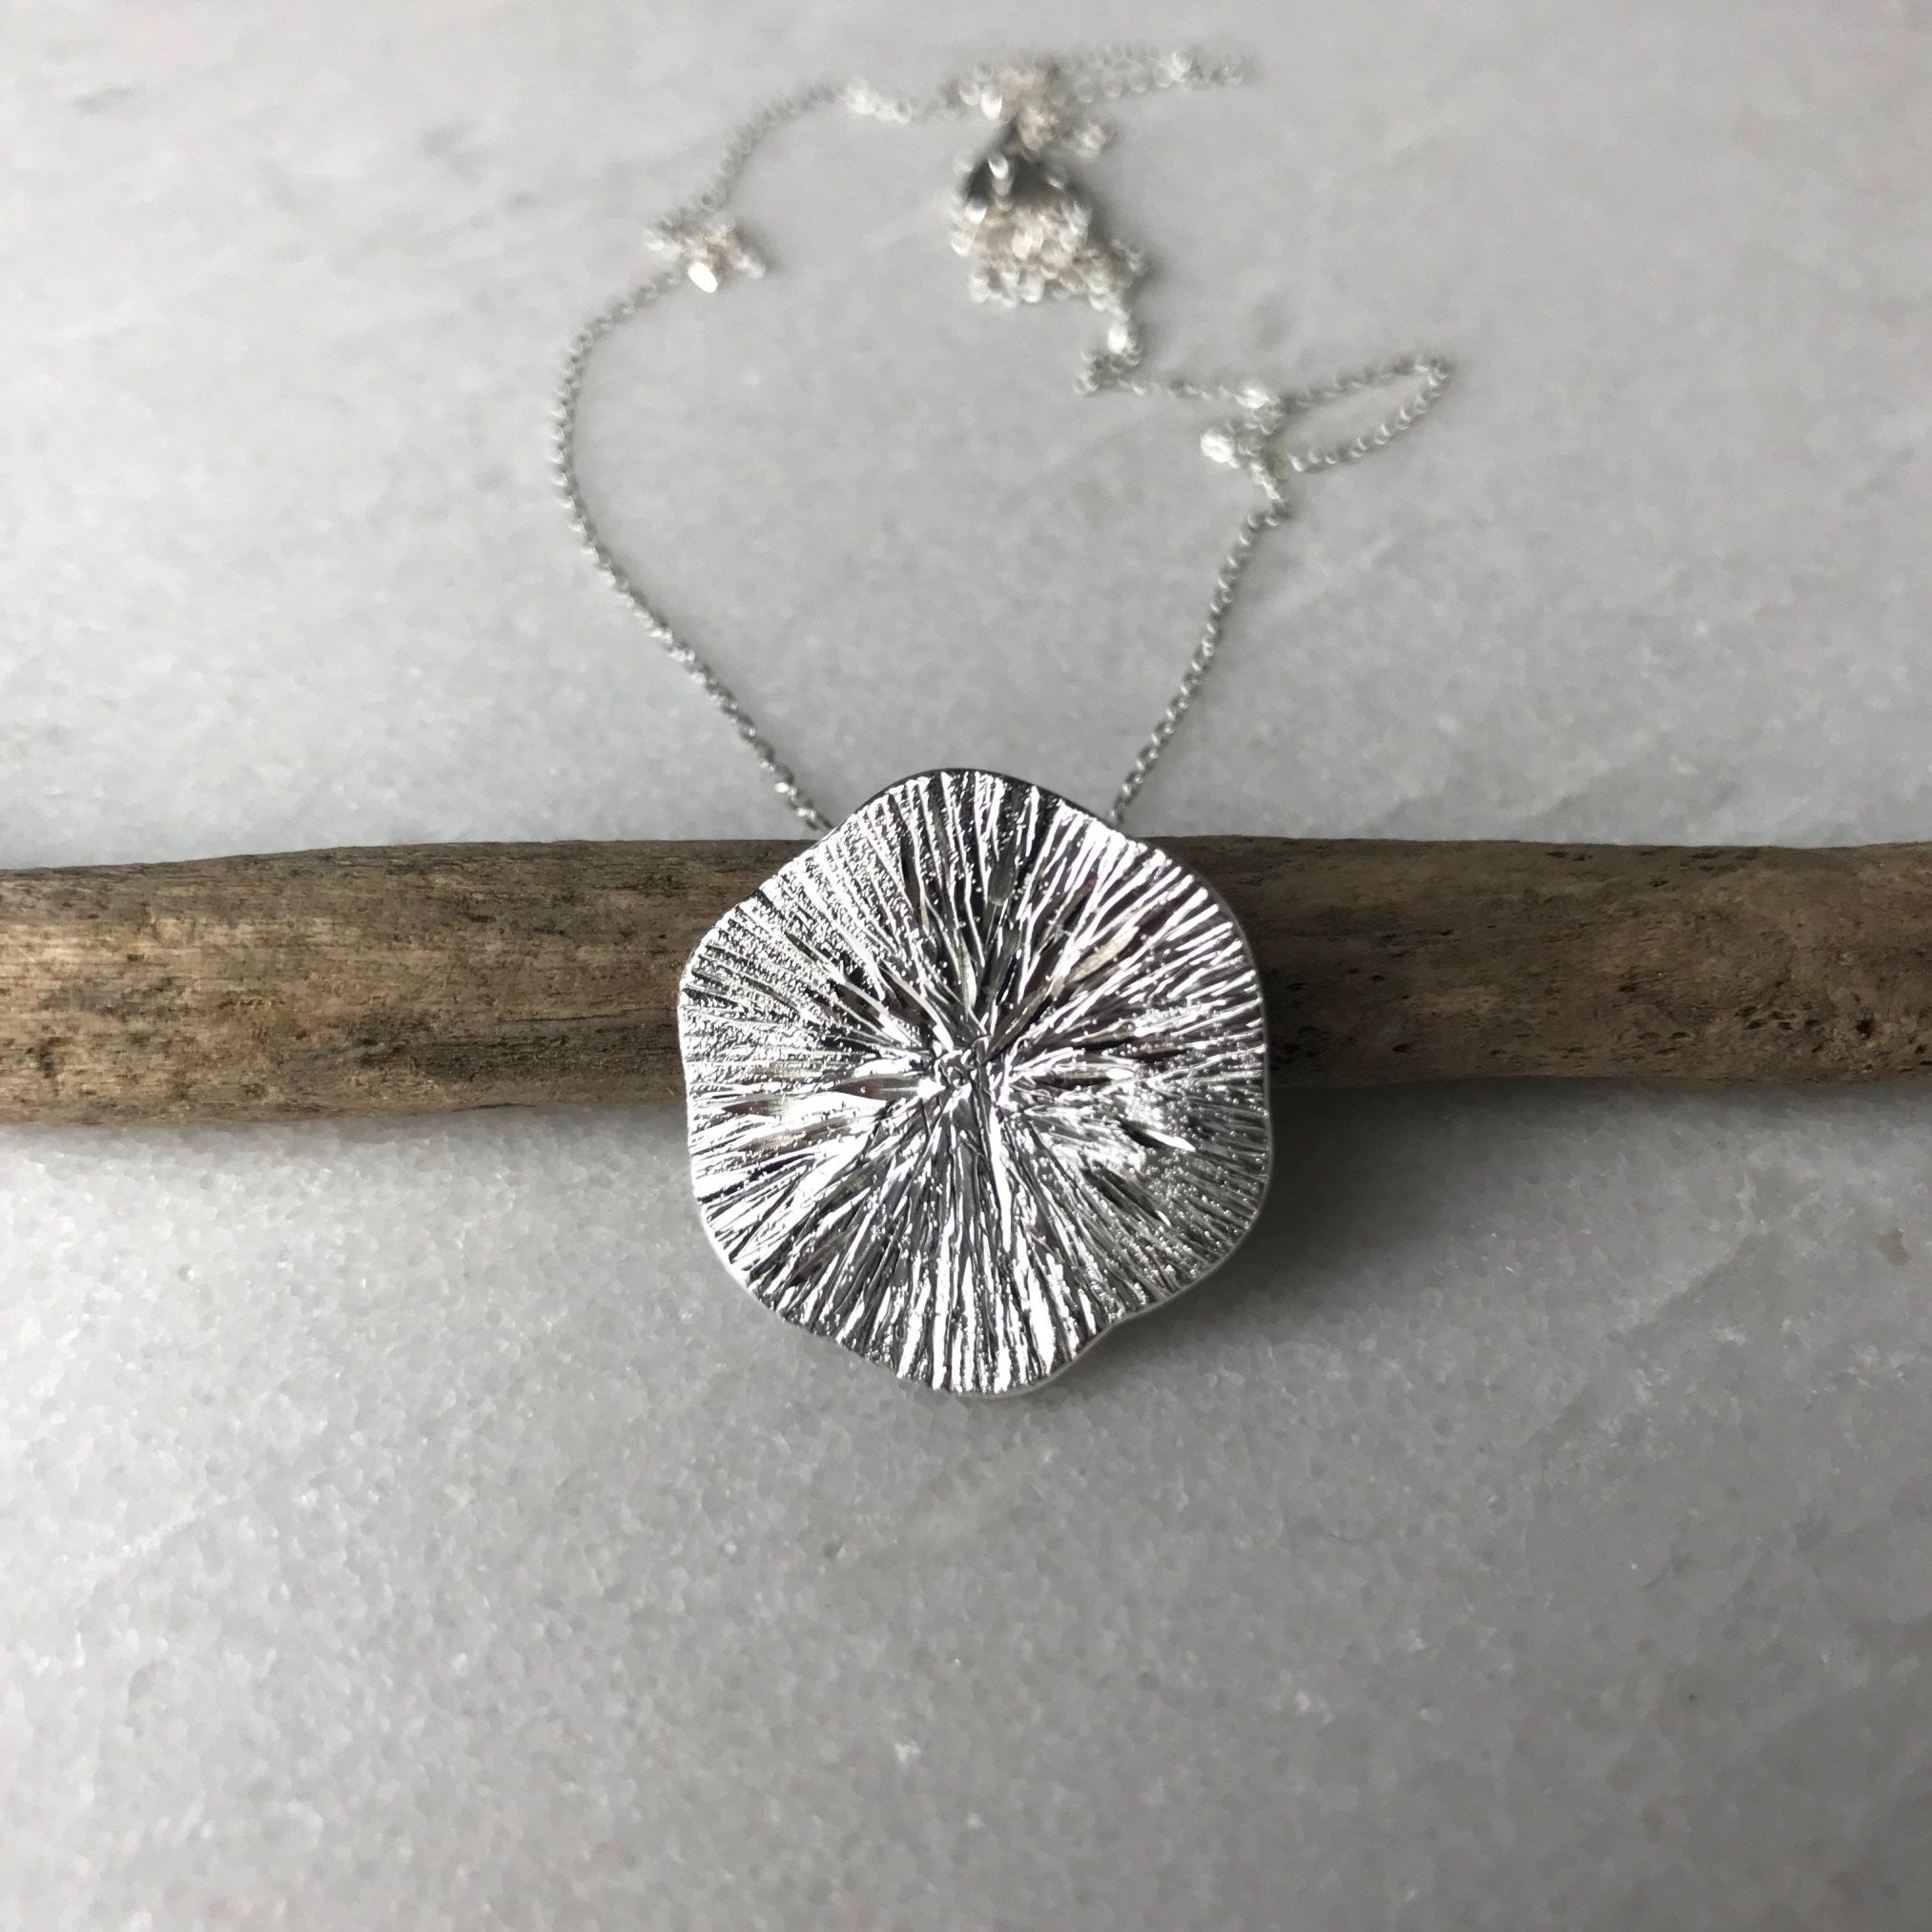 Large Silver Textured Disc Necklace - The Nancy Smillie Shop - Art, Jewellery & Designer Gifts Glasgow